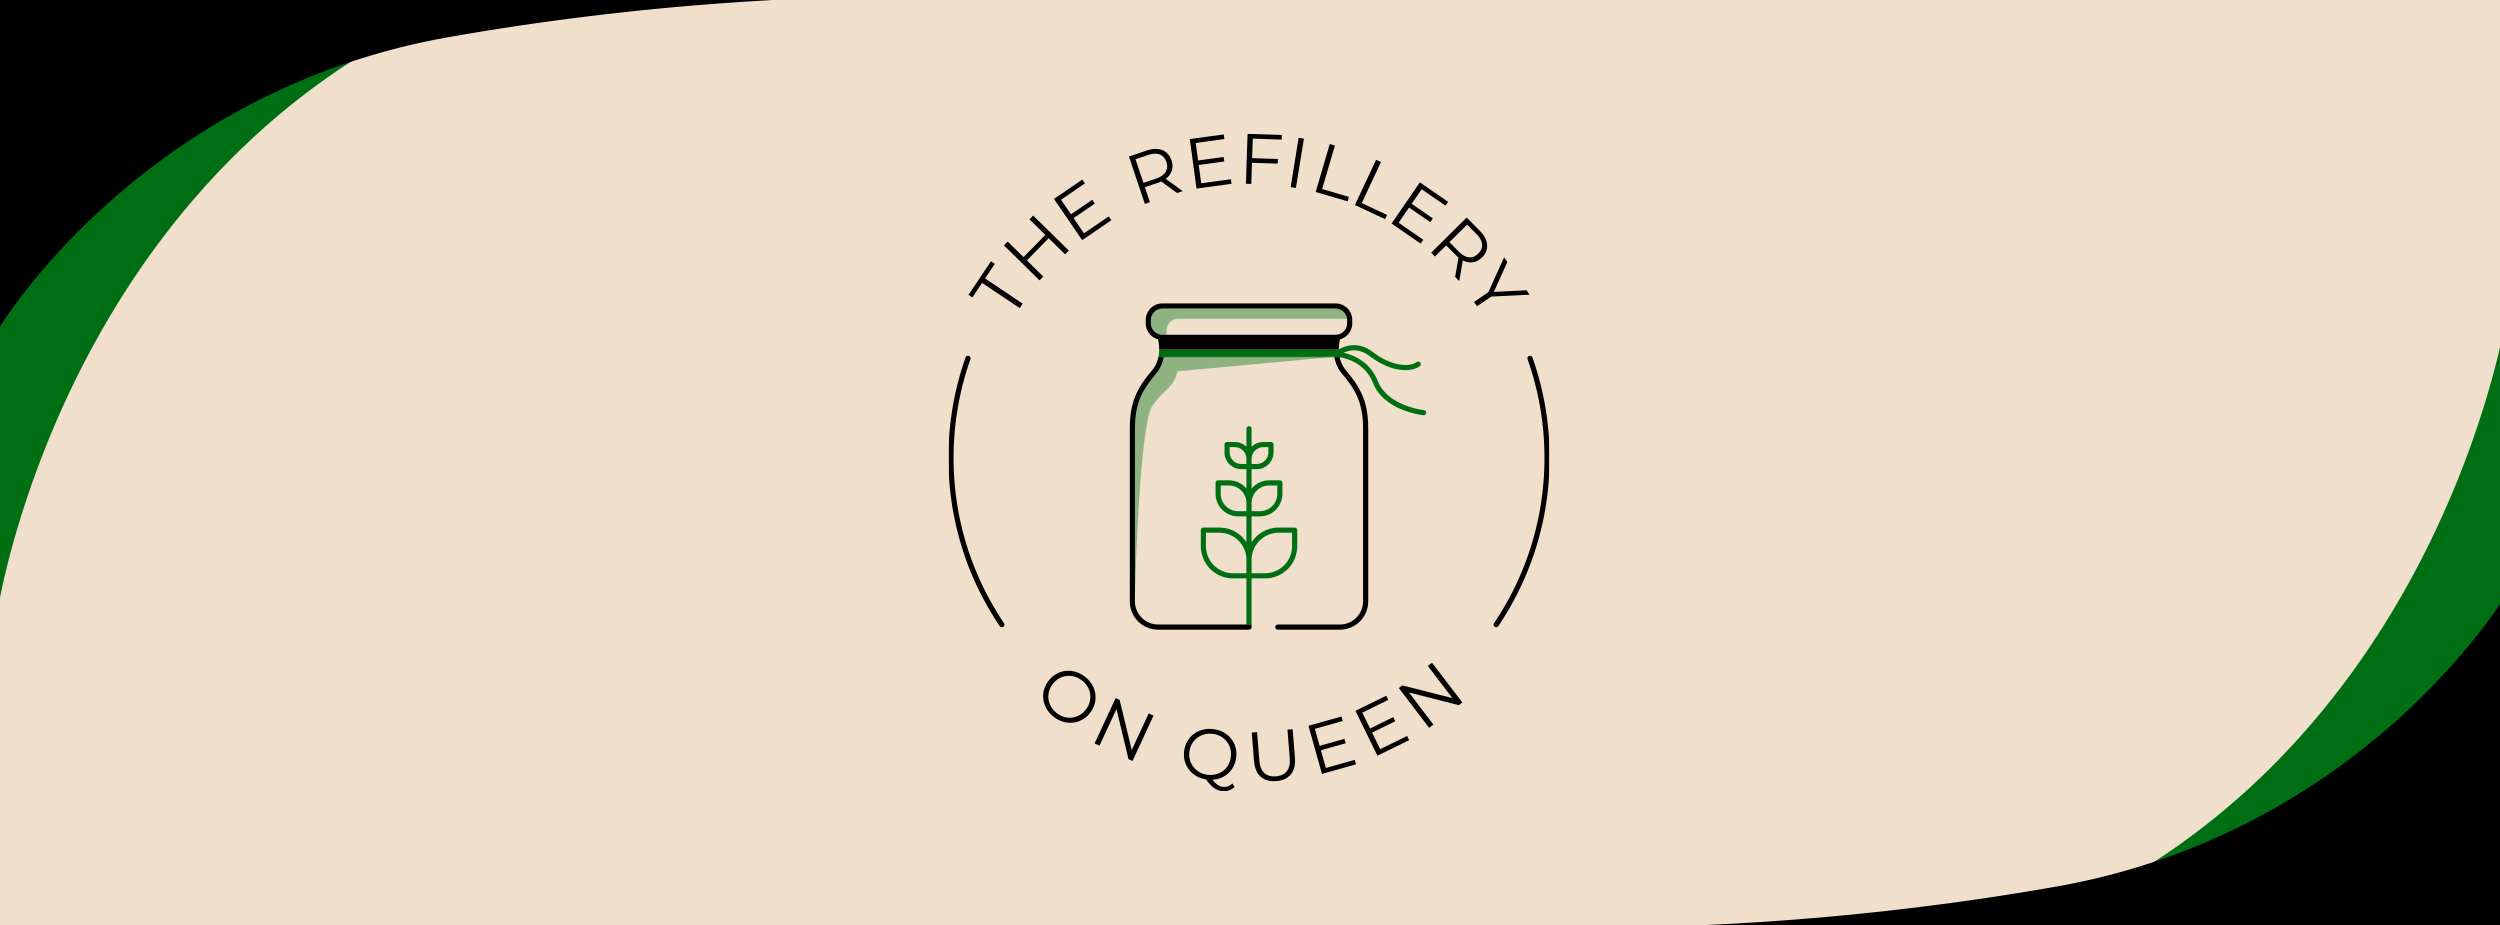 The Refillery logo.png